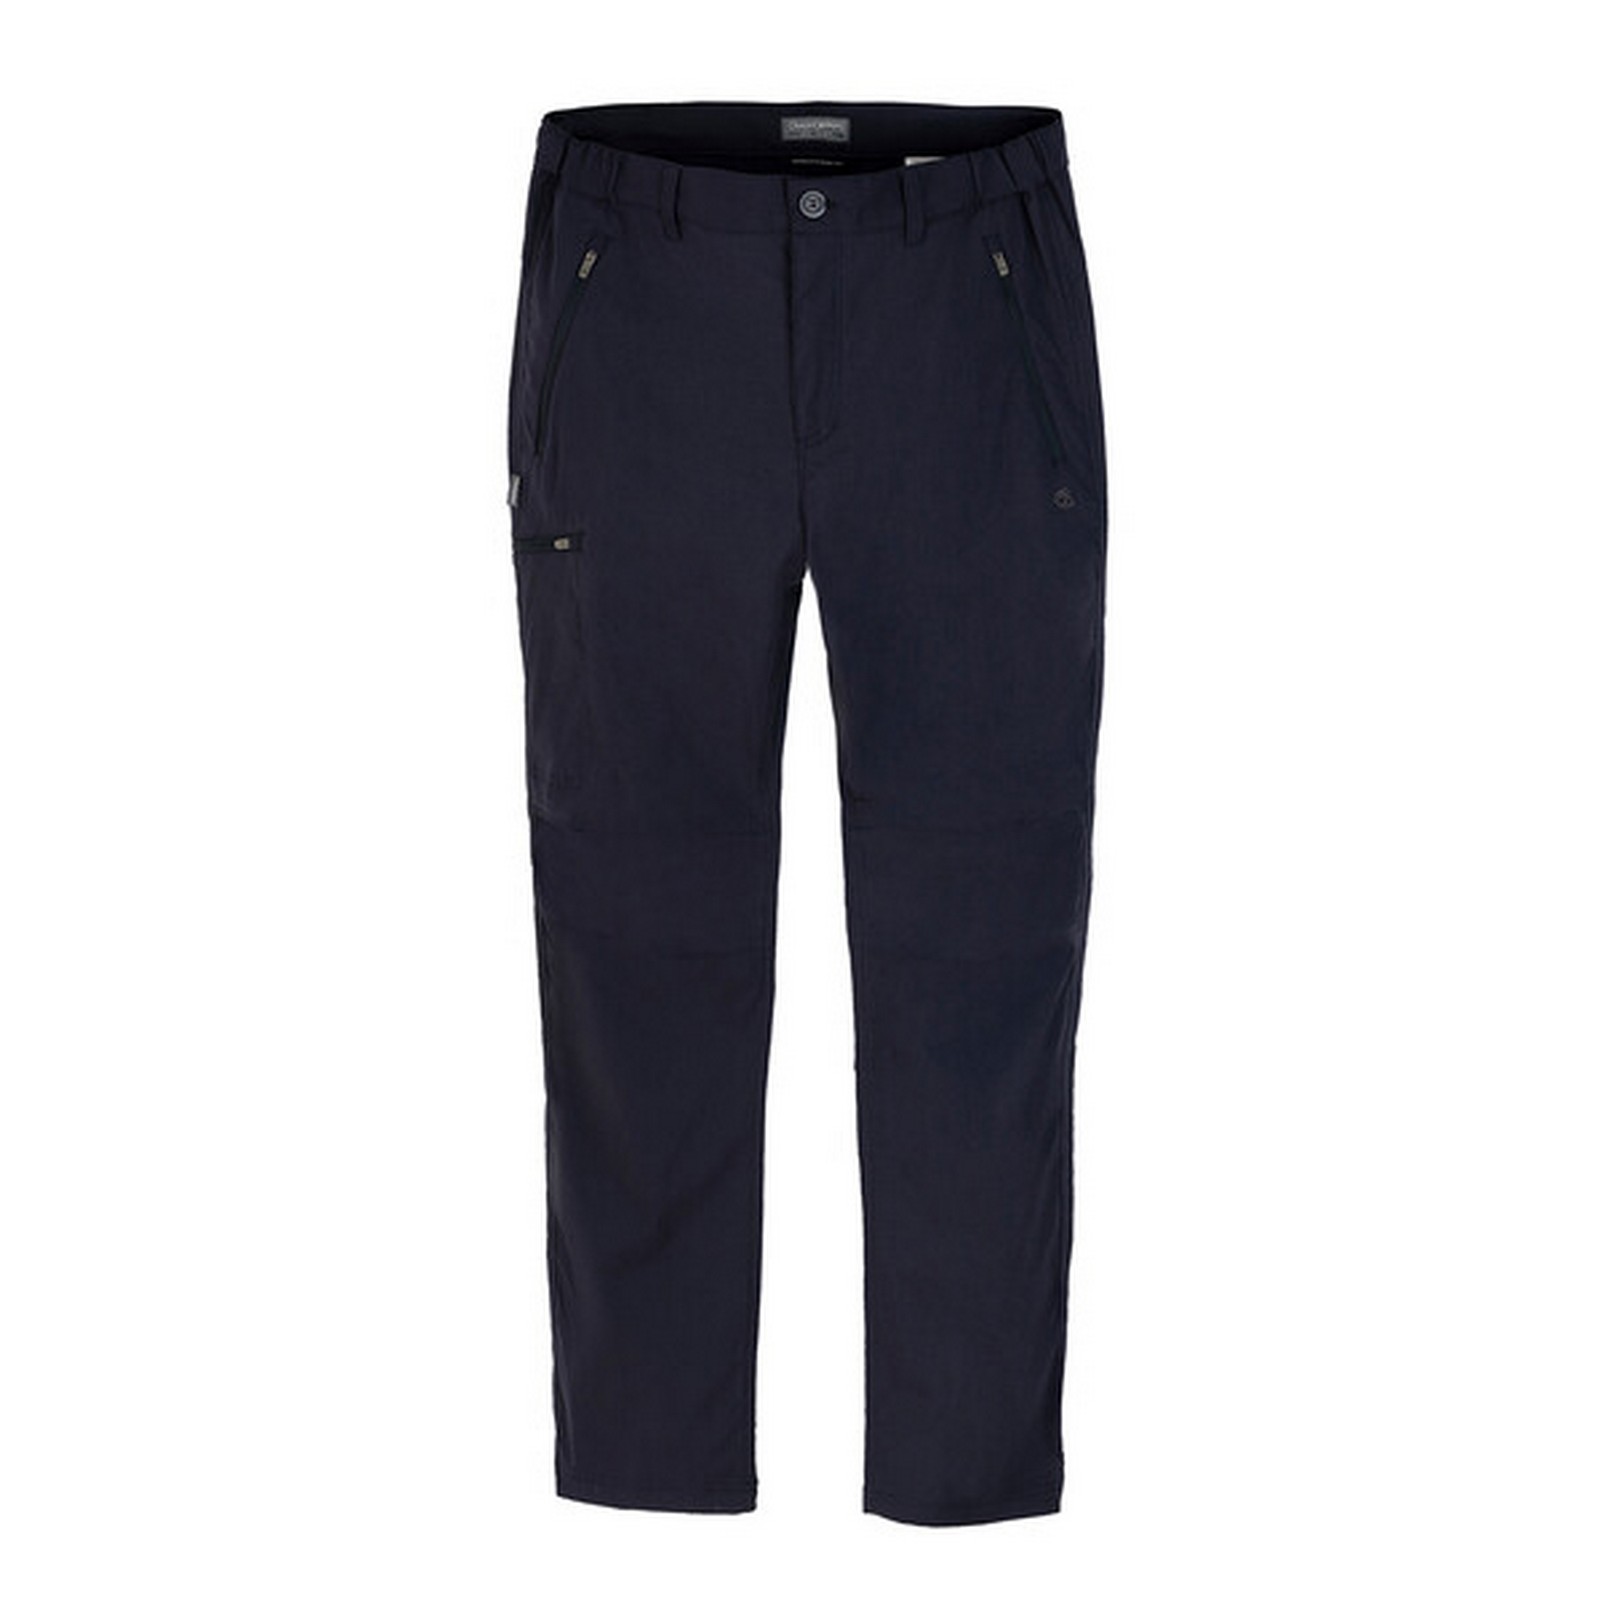 Craghoppers Kiwi Pro II stretch trousers | WISE Worksafe